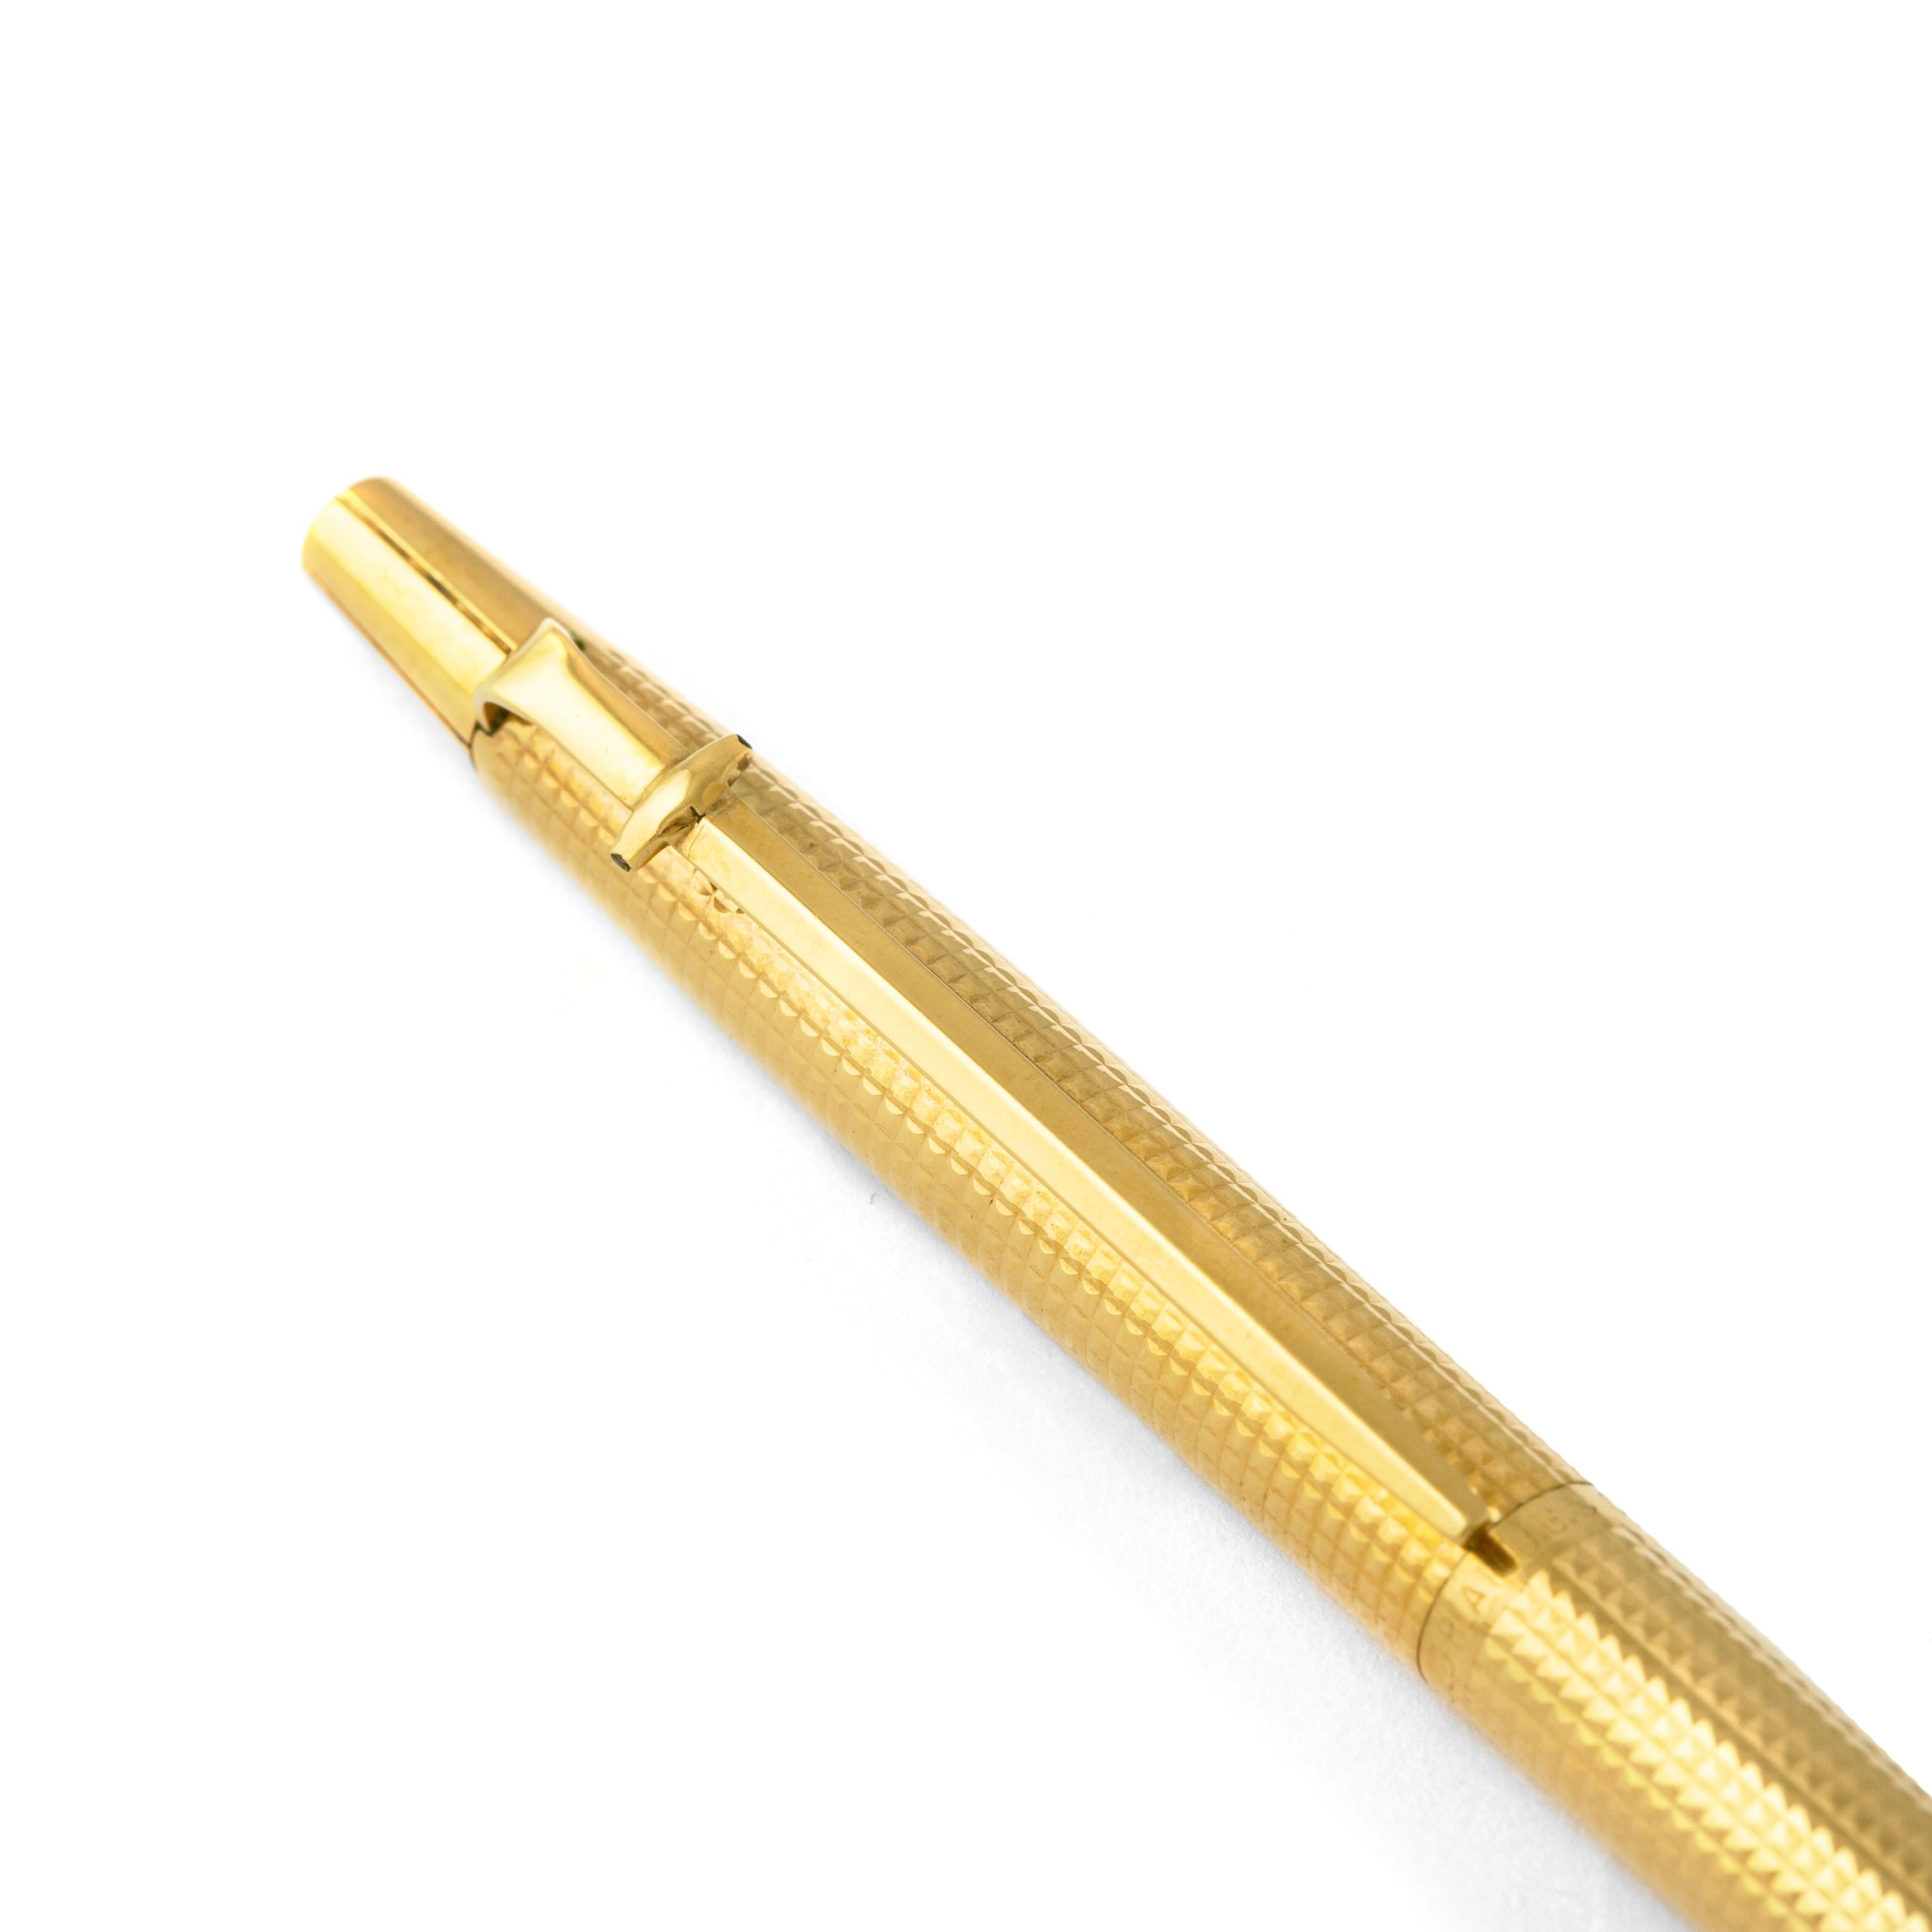 Caran d'Ache. Collection Madison. 
Gold plated BallPoint Pen.
Circa 1990. 
Dimensions: 13.50 x 0.80 centimeters.

Sold as is. We do not guarantee the proper functioning of this pen.